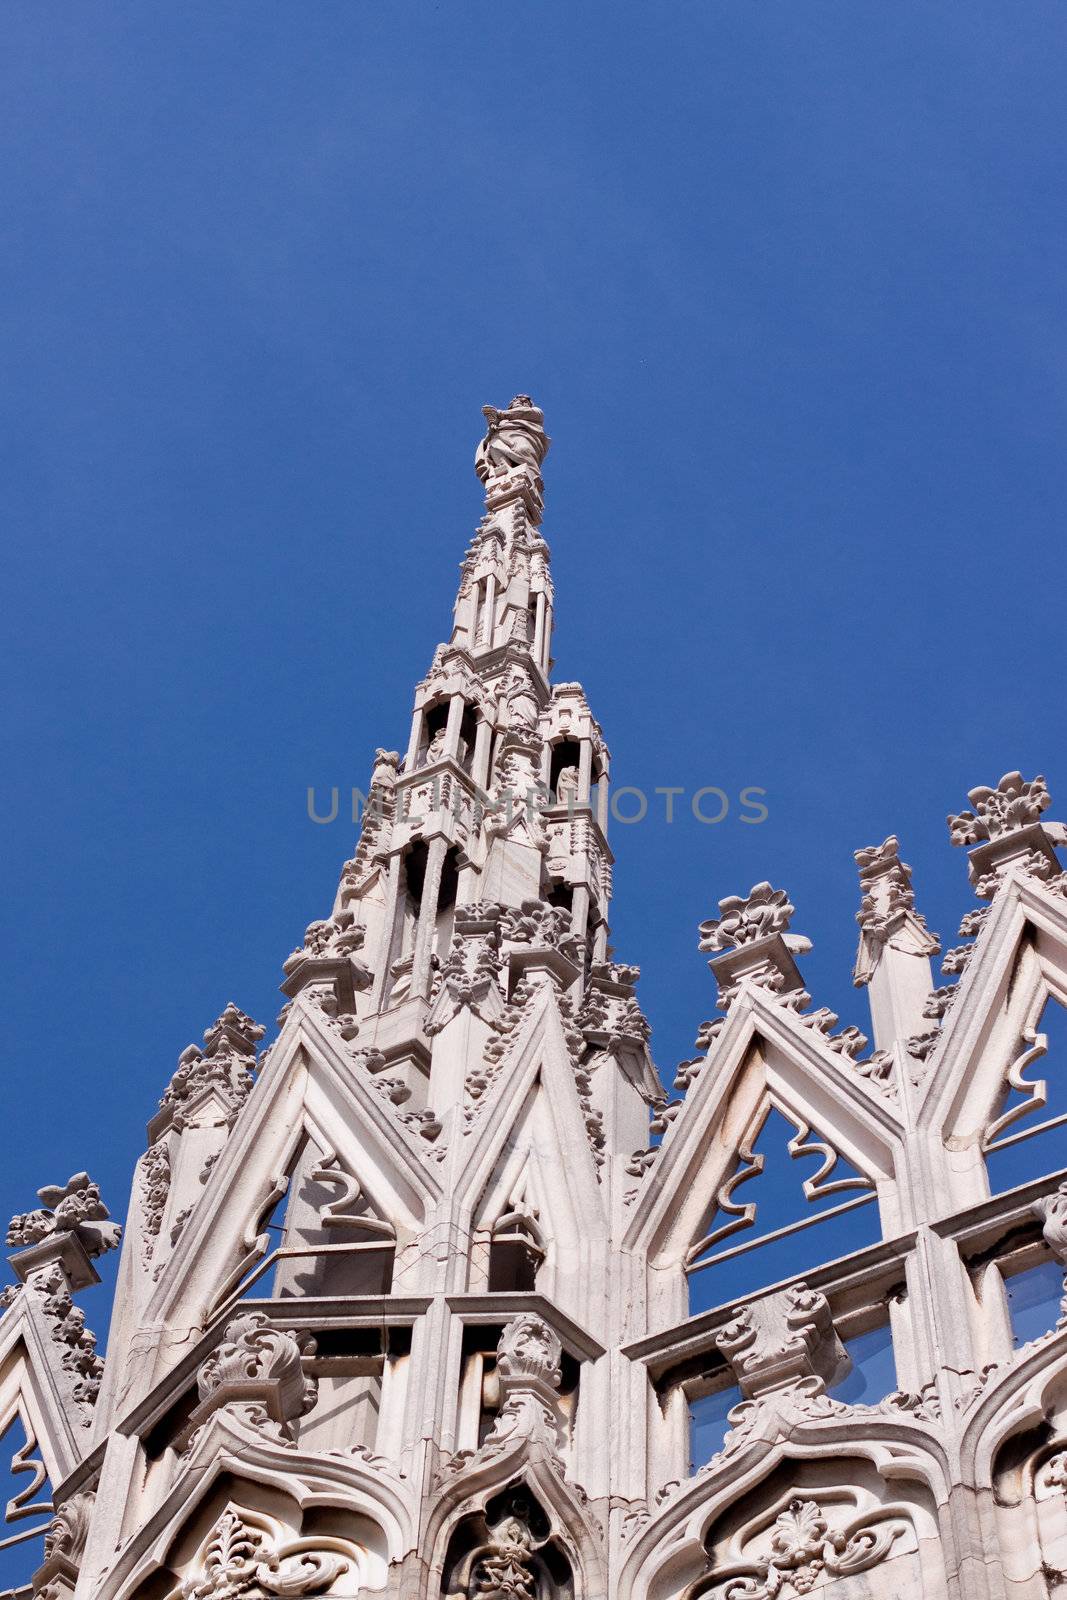 turrets on the cupola of Milan's cathedral
